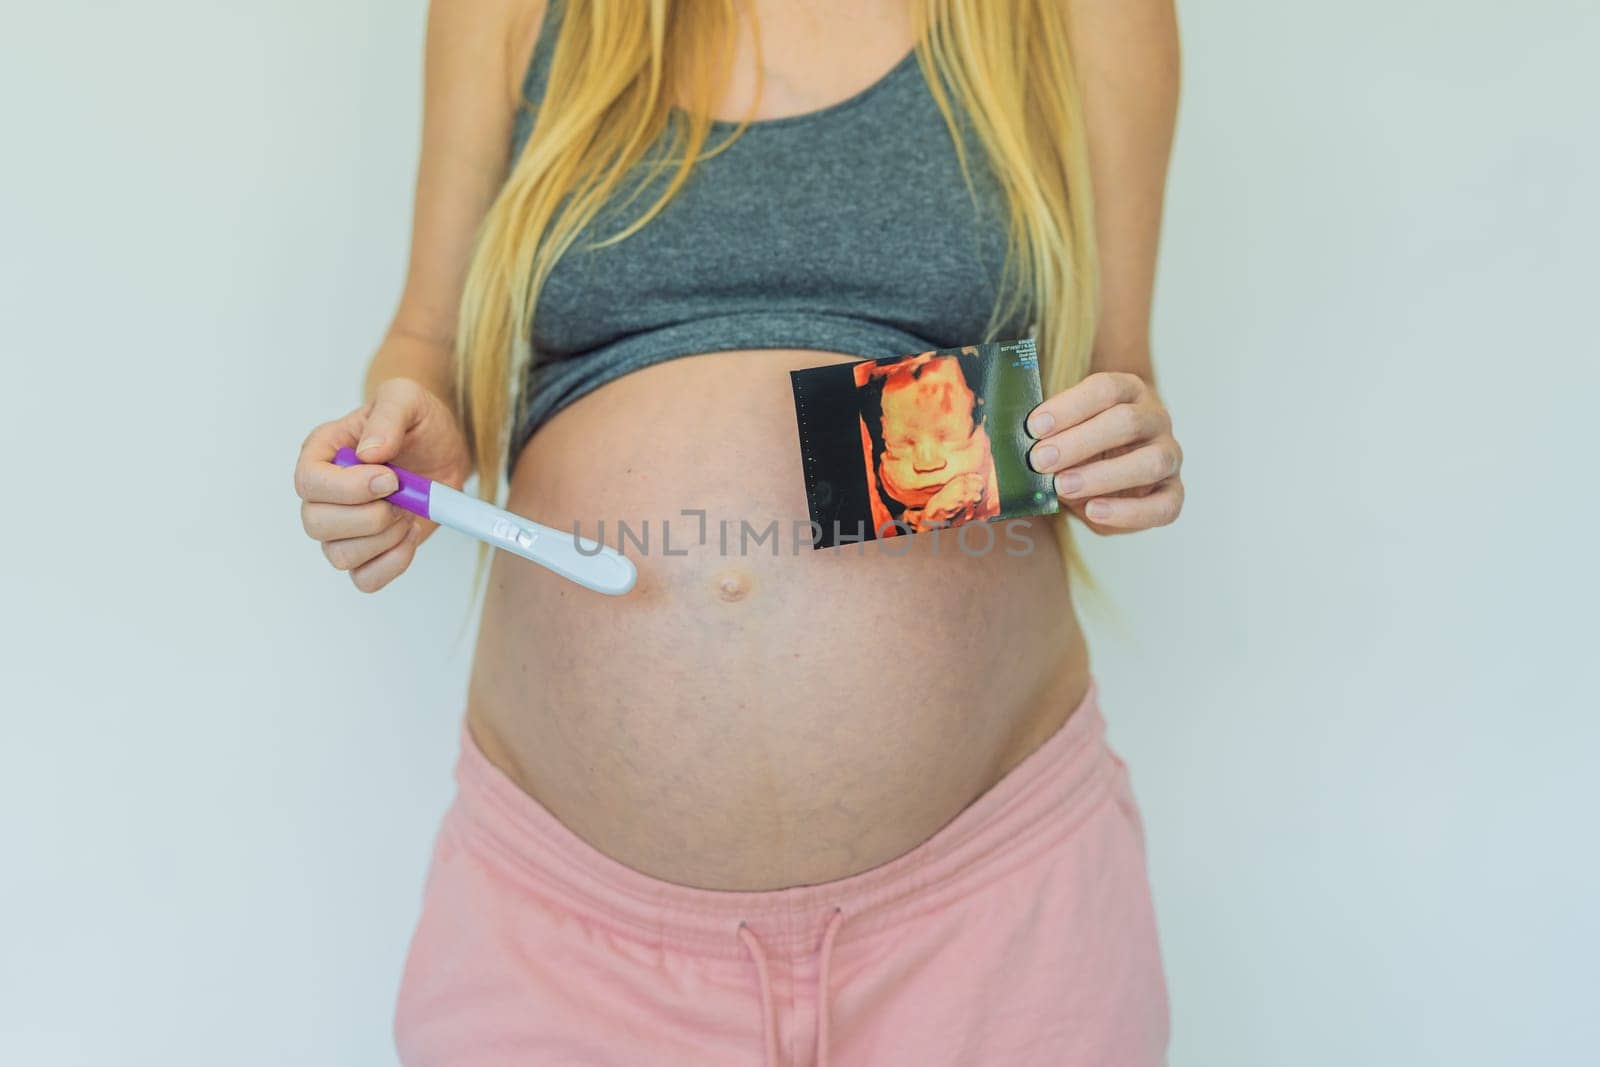 Joyful pregnant woman shares the exciting news, proudly displaying her positive pregnancy test and a heartwarming ultrasound photo.